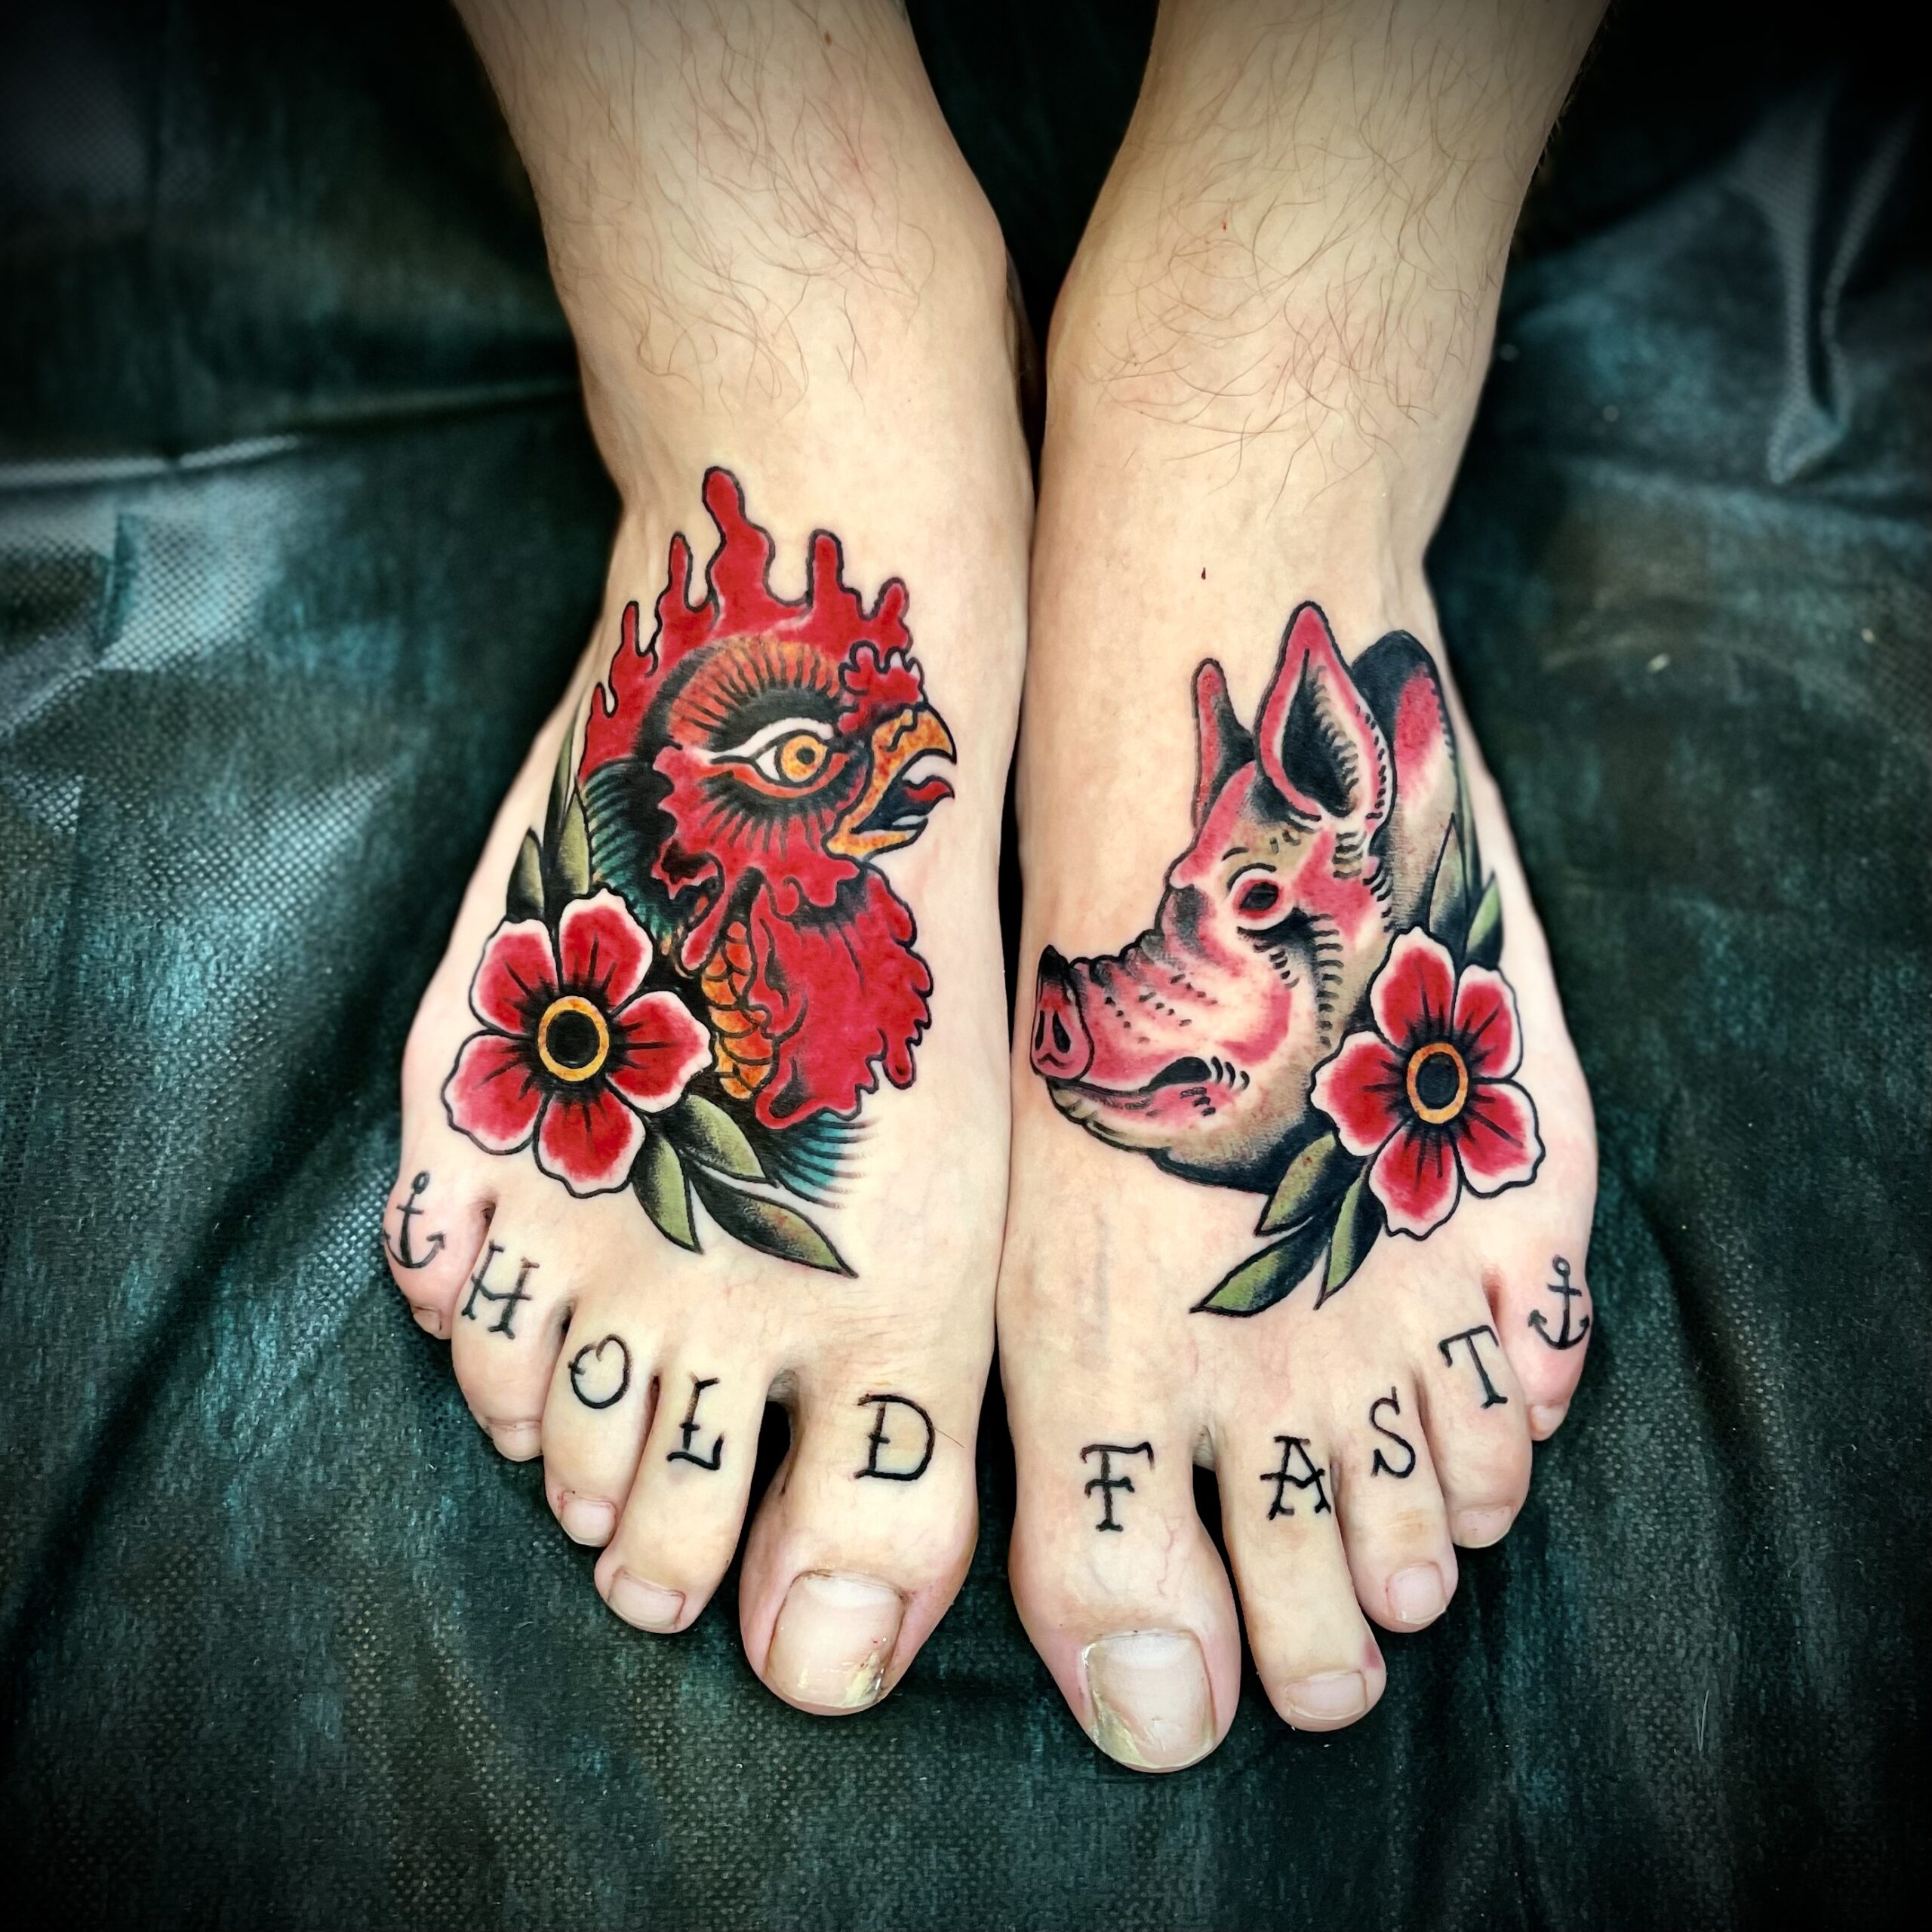 tattoo of a rooster and a pig on a man's feet